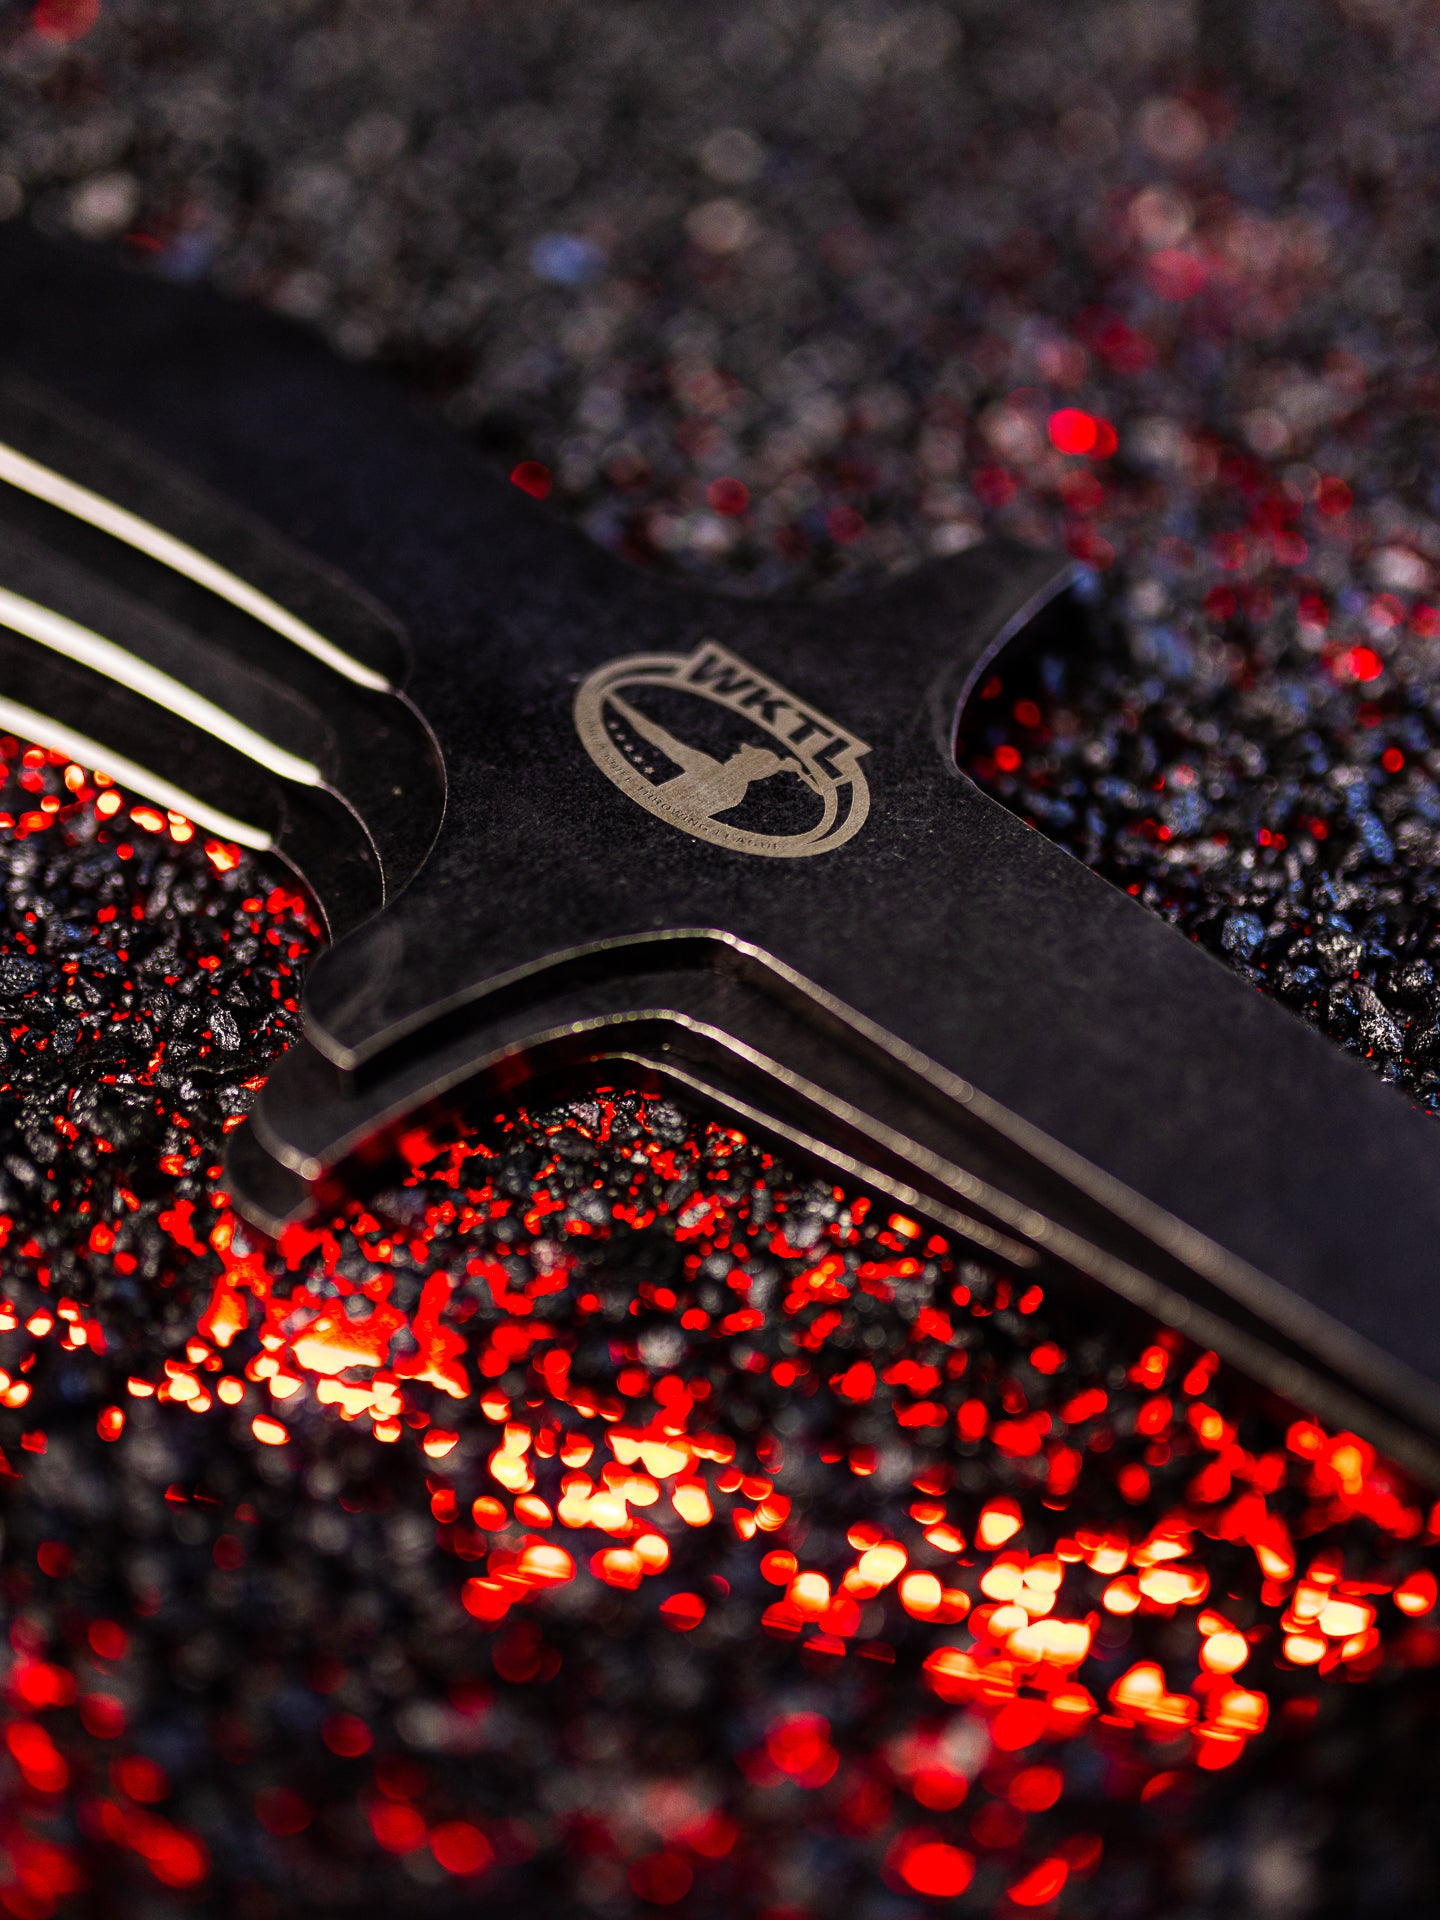 World Knife Throwing League (WKTL) Certified Competition Throwing Knife, The Griffin Guards